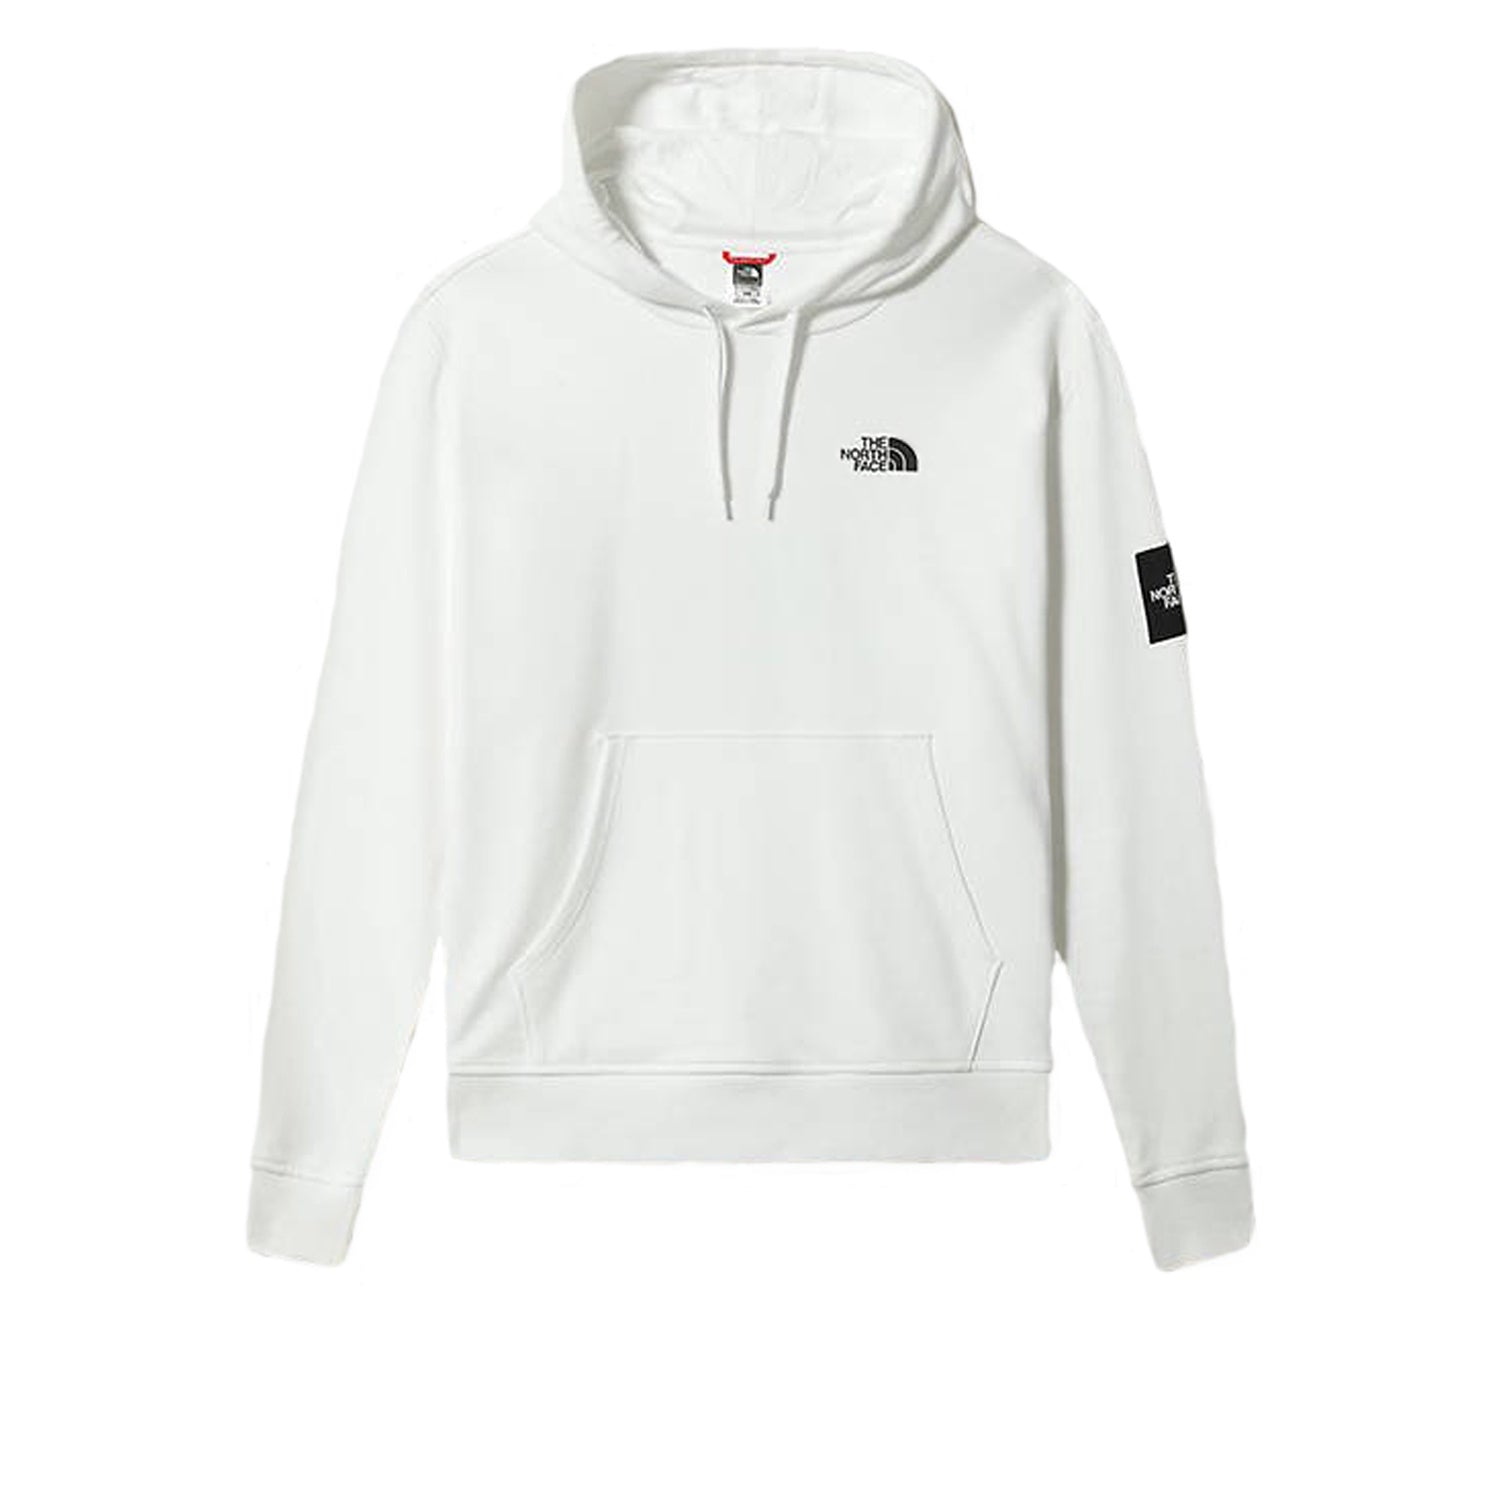 The North Face Black Box Hooded Fleece White